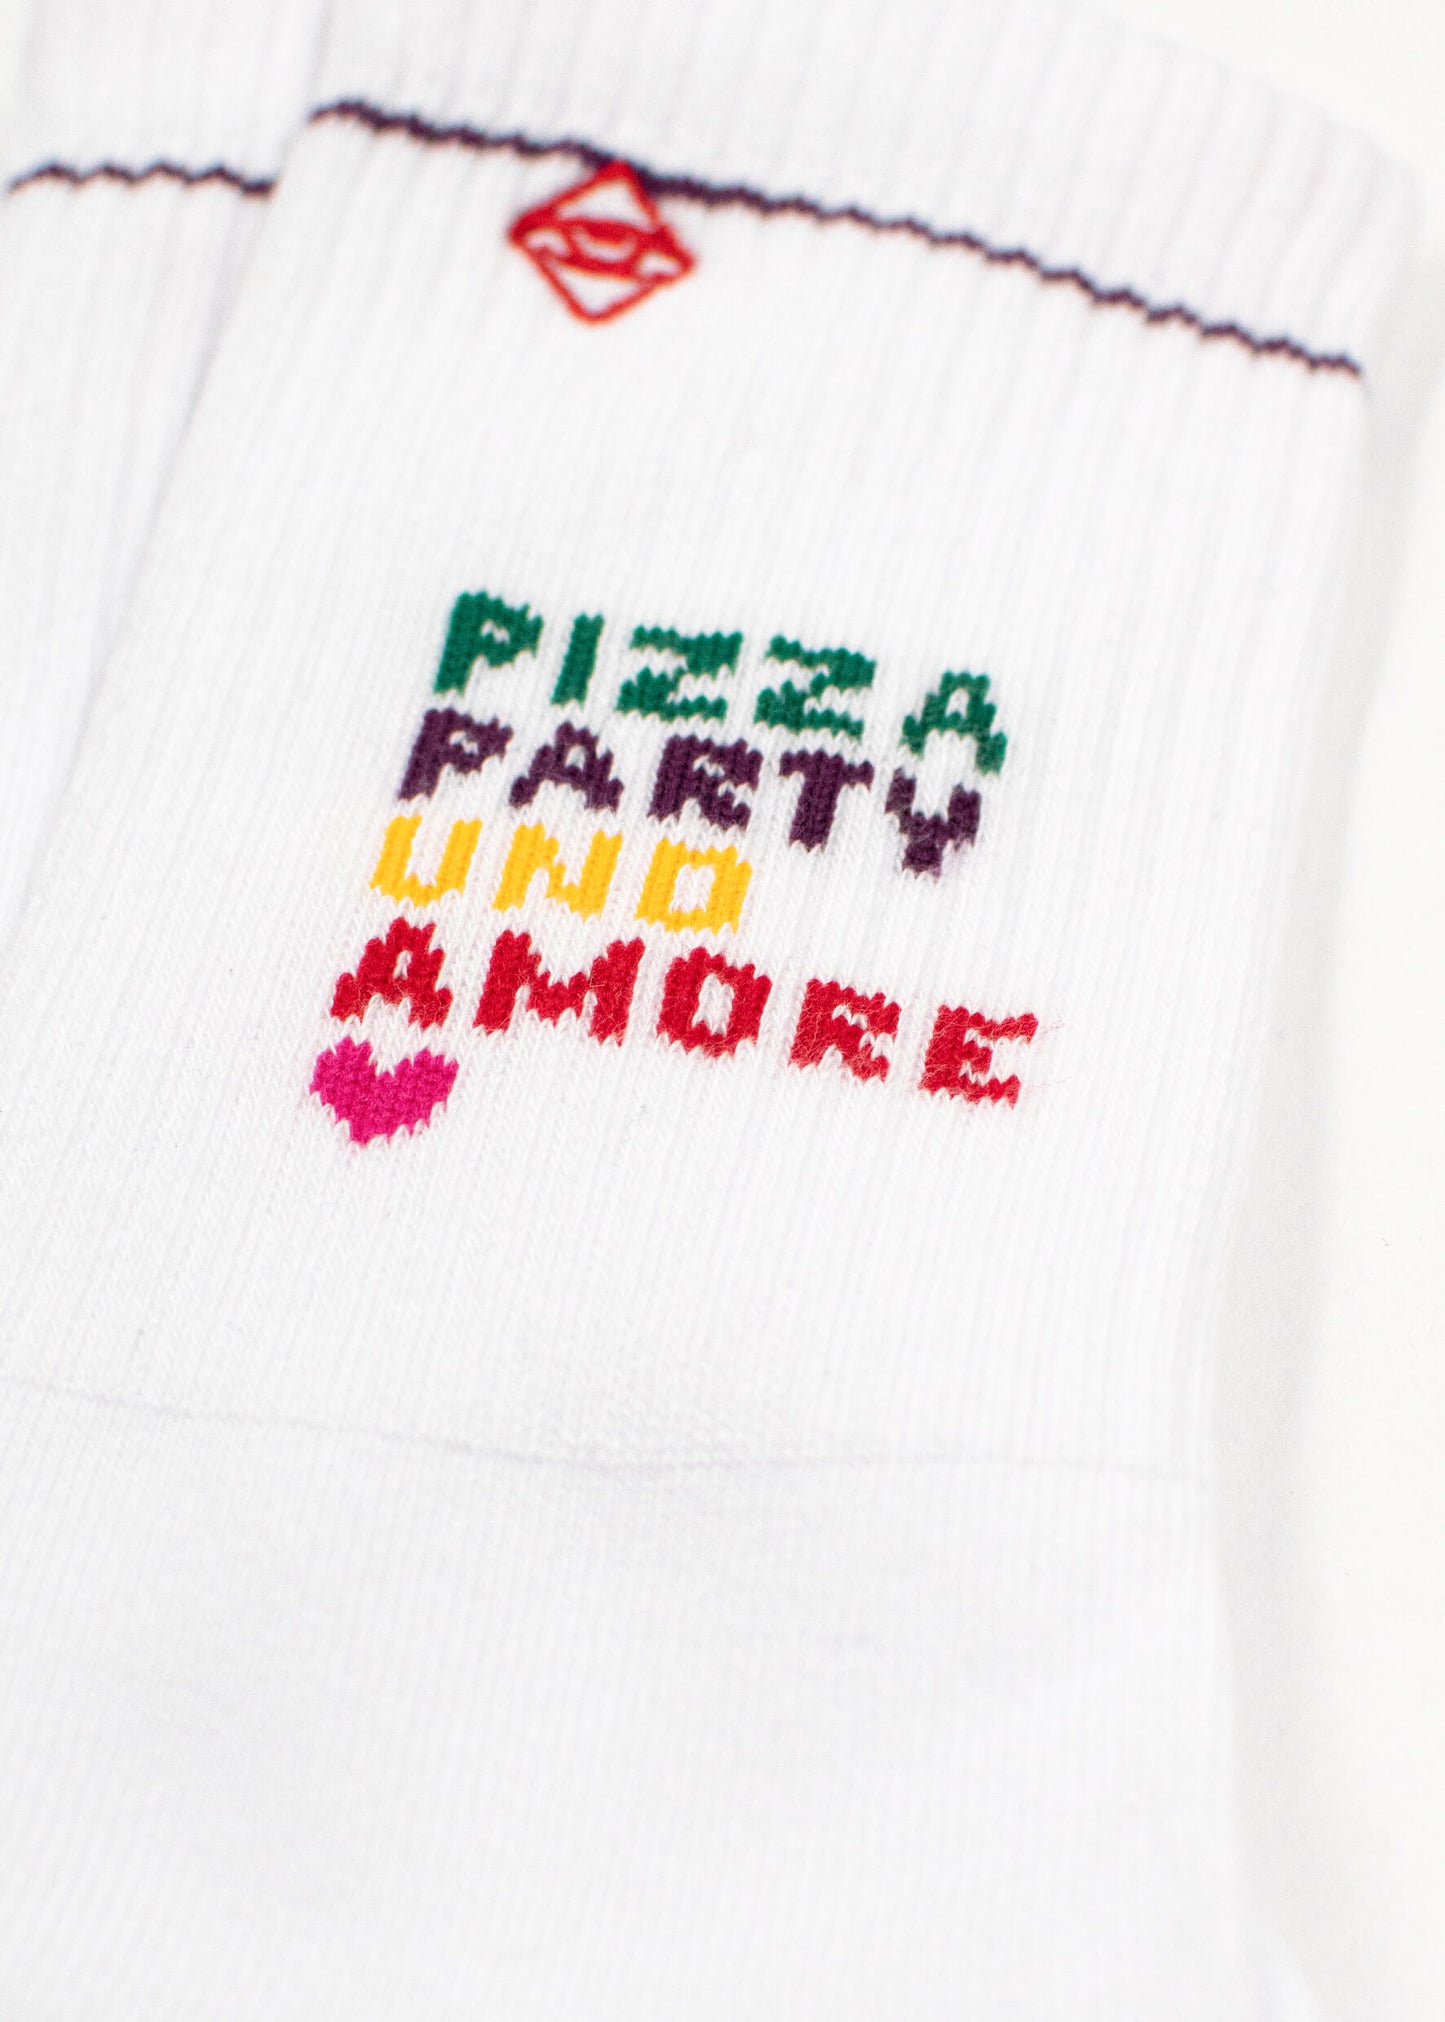 Pizza Party & Amore